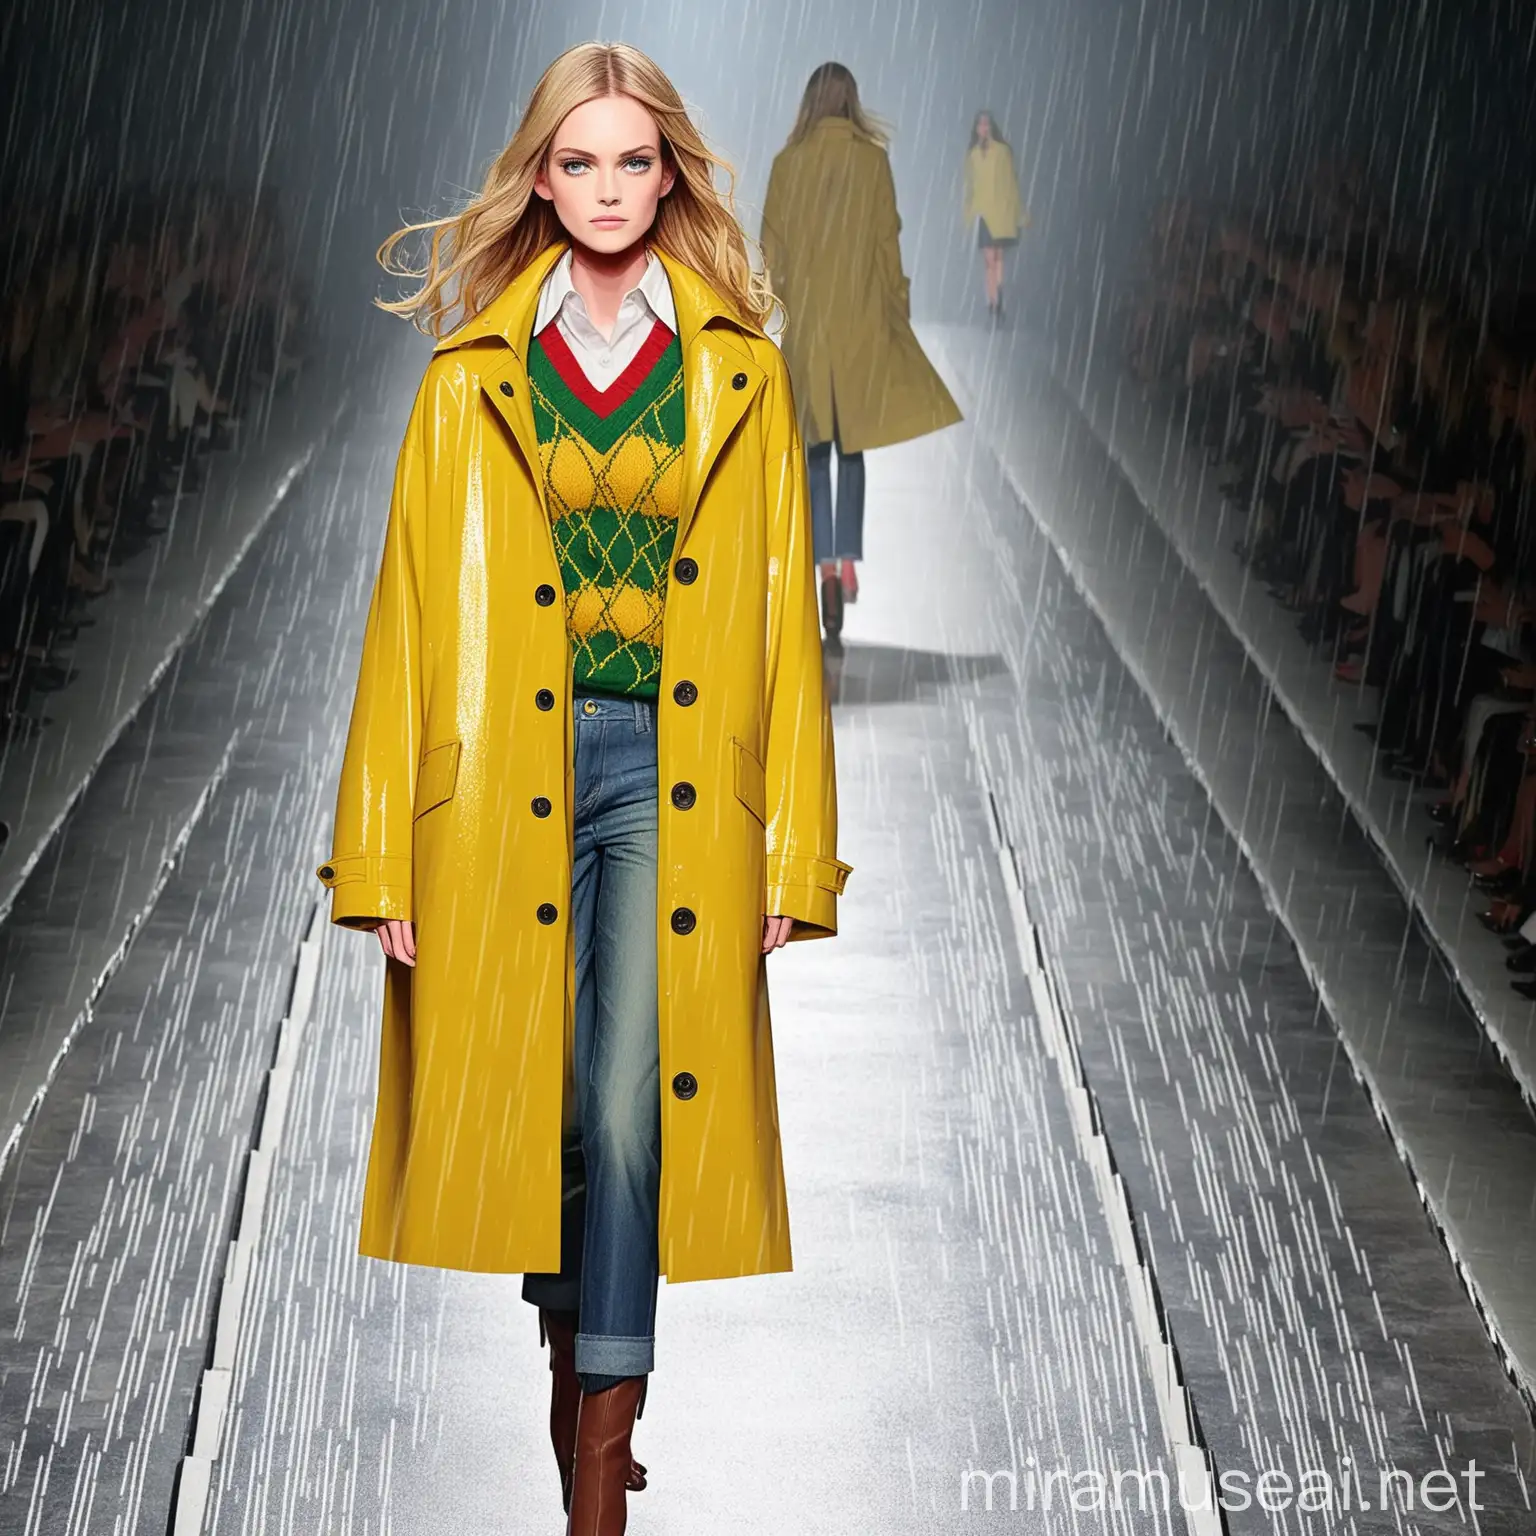 A fashion runway with a classic yellow rain coat and Irish sweater layered with classic with shirt